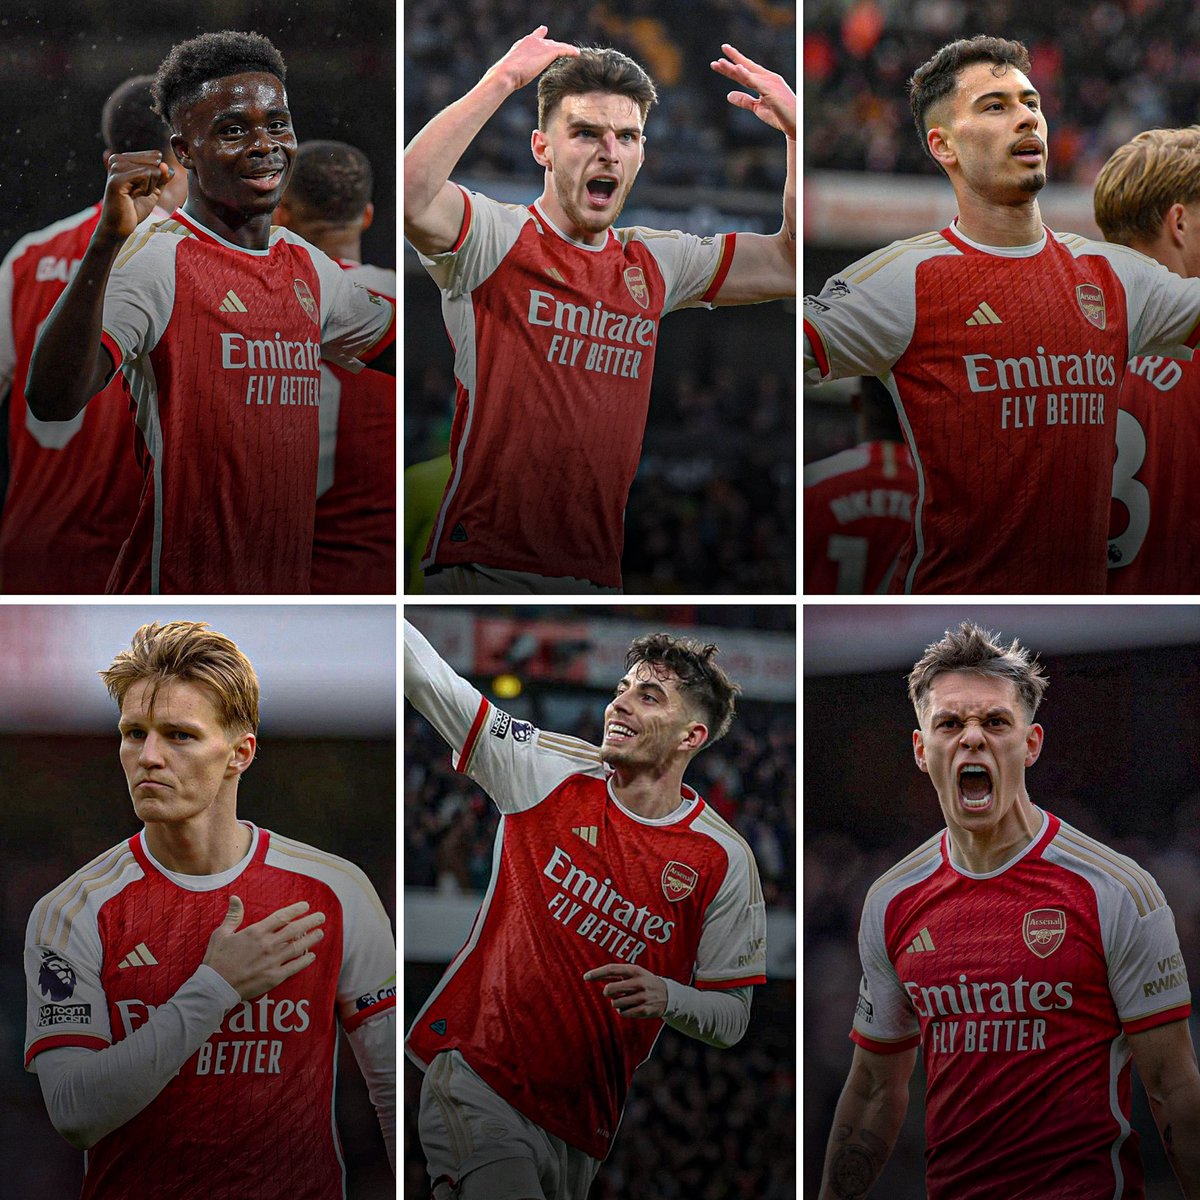 Six Arsenal players have been directly involved in 10+ Premier League goals this season:

24 - Bukayo Saka
18 - Kai Havertz
16 - Martin Odegaard
13 - Declan Rice
12 - Gabriel Martinelli
11 - Leandro Trossard

No team has more players in double figures.